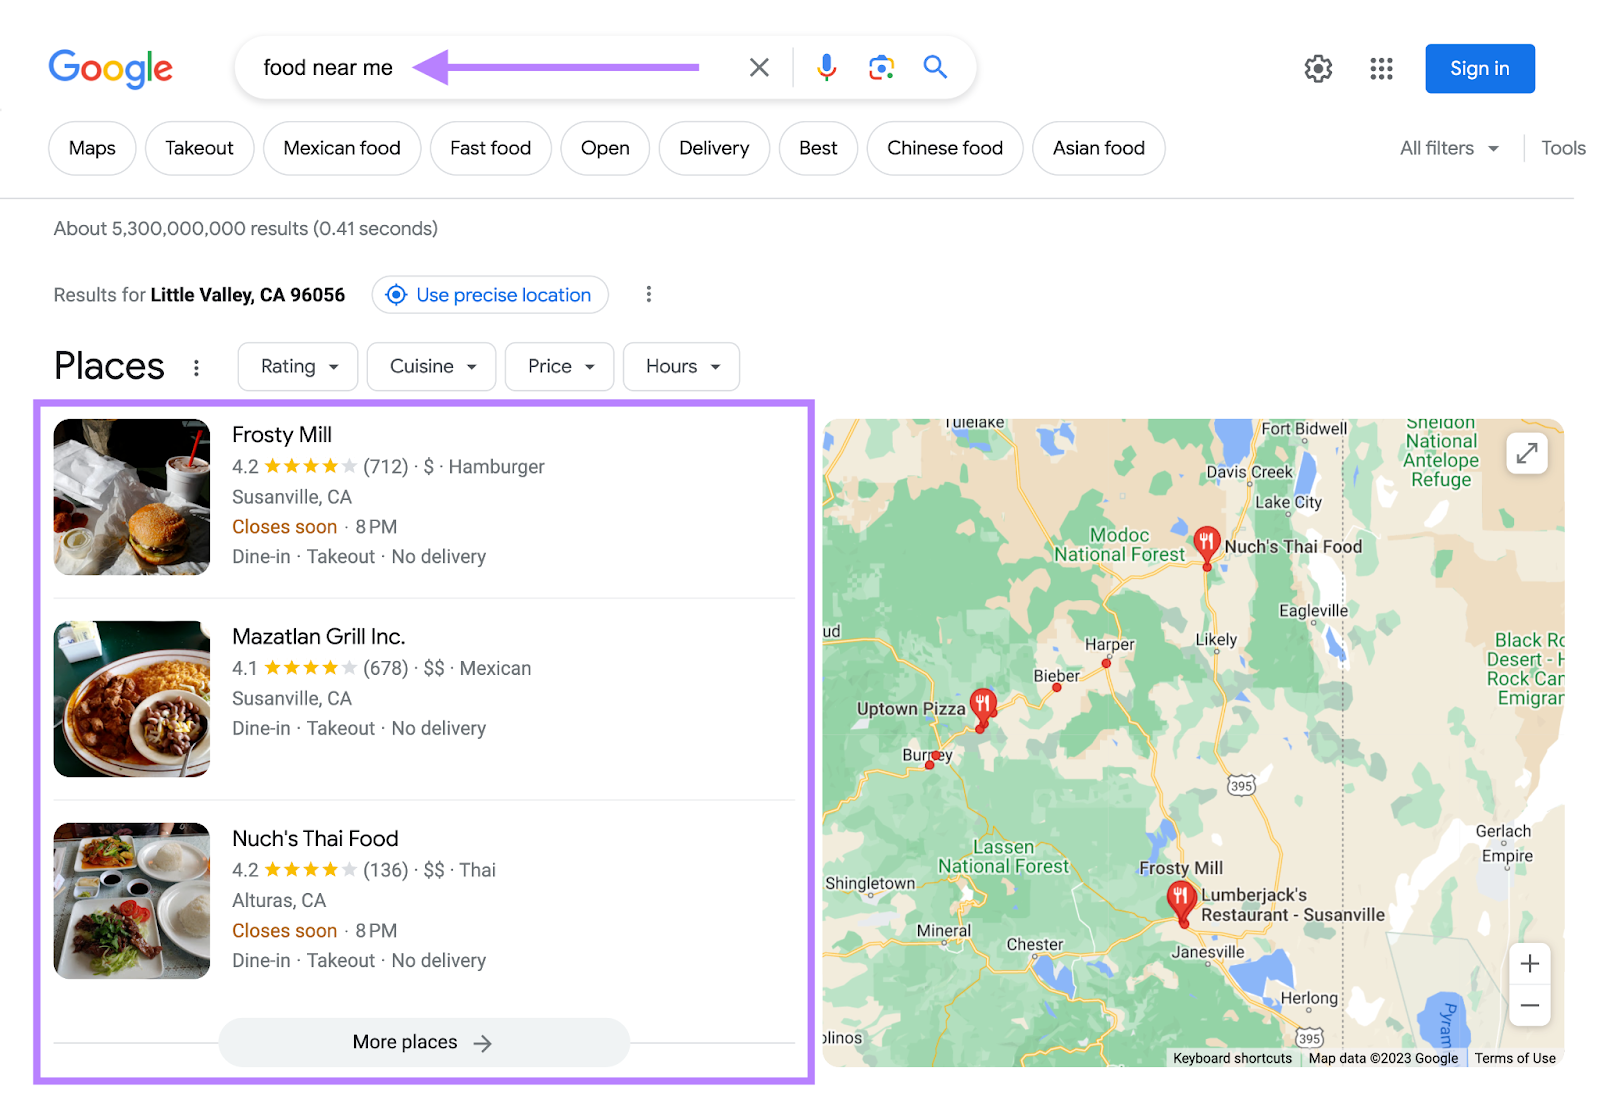 an example of a local search result on Google